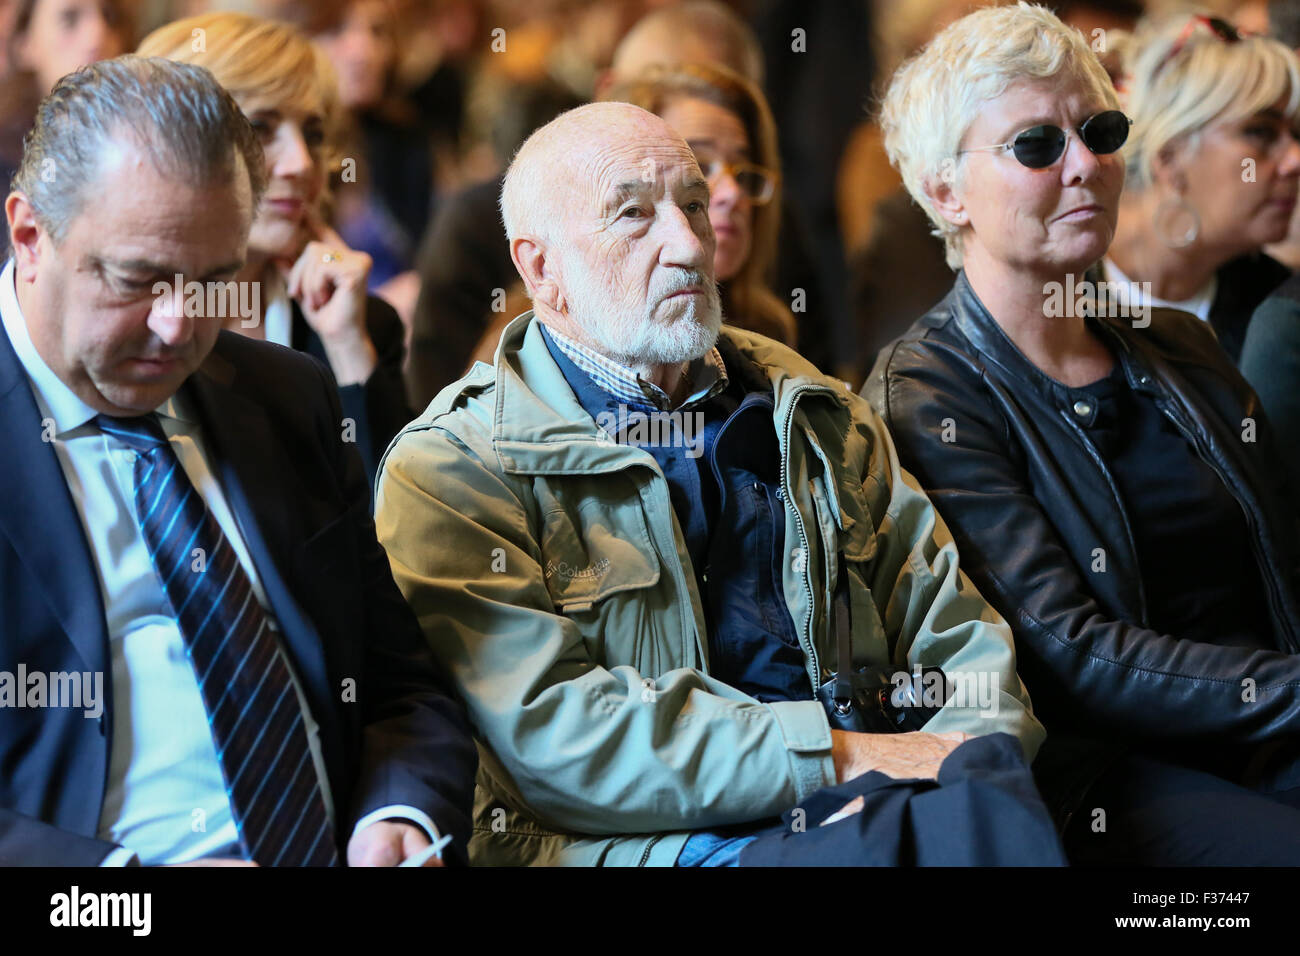 Turin, Italy. 30th Sep, 2015. In photo the photographer Gianni Berengo Gardin. It opened with exhibition 'Ukraine' by Boris Mikhailov, 'Camera' the Italian Center for Photography that puts Turin as a landmark of photography in Italy. © Elena Aquila/Pacific Press/Alamy Live News Stock Photo